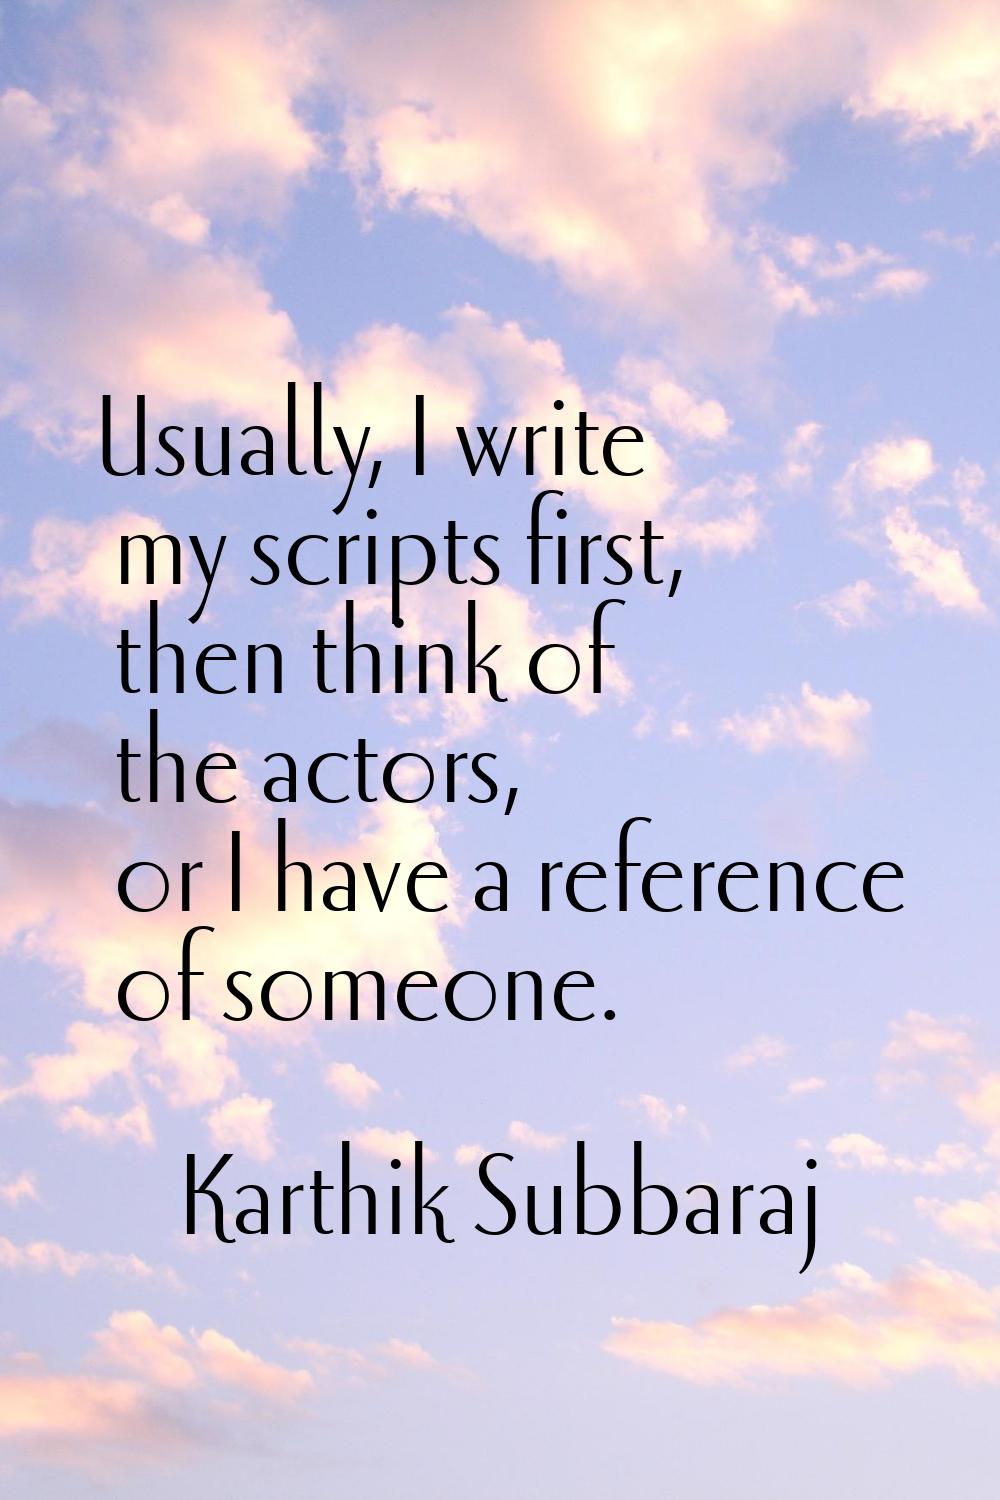 Usually, I write my scripts first, then think of the actors, or I have a reference of someone.